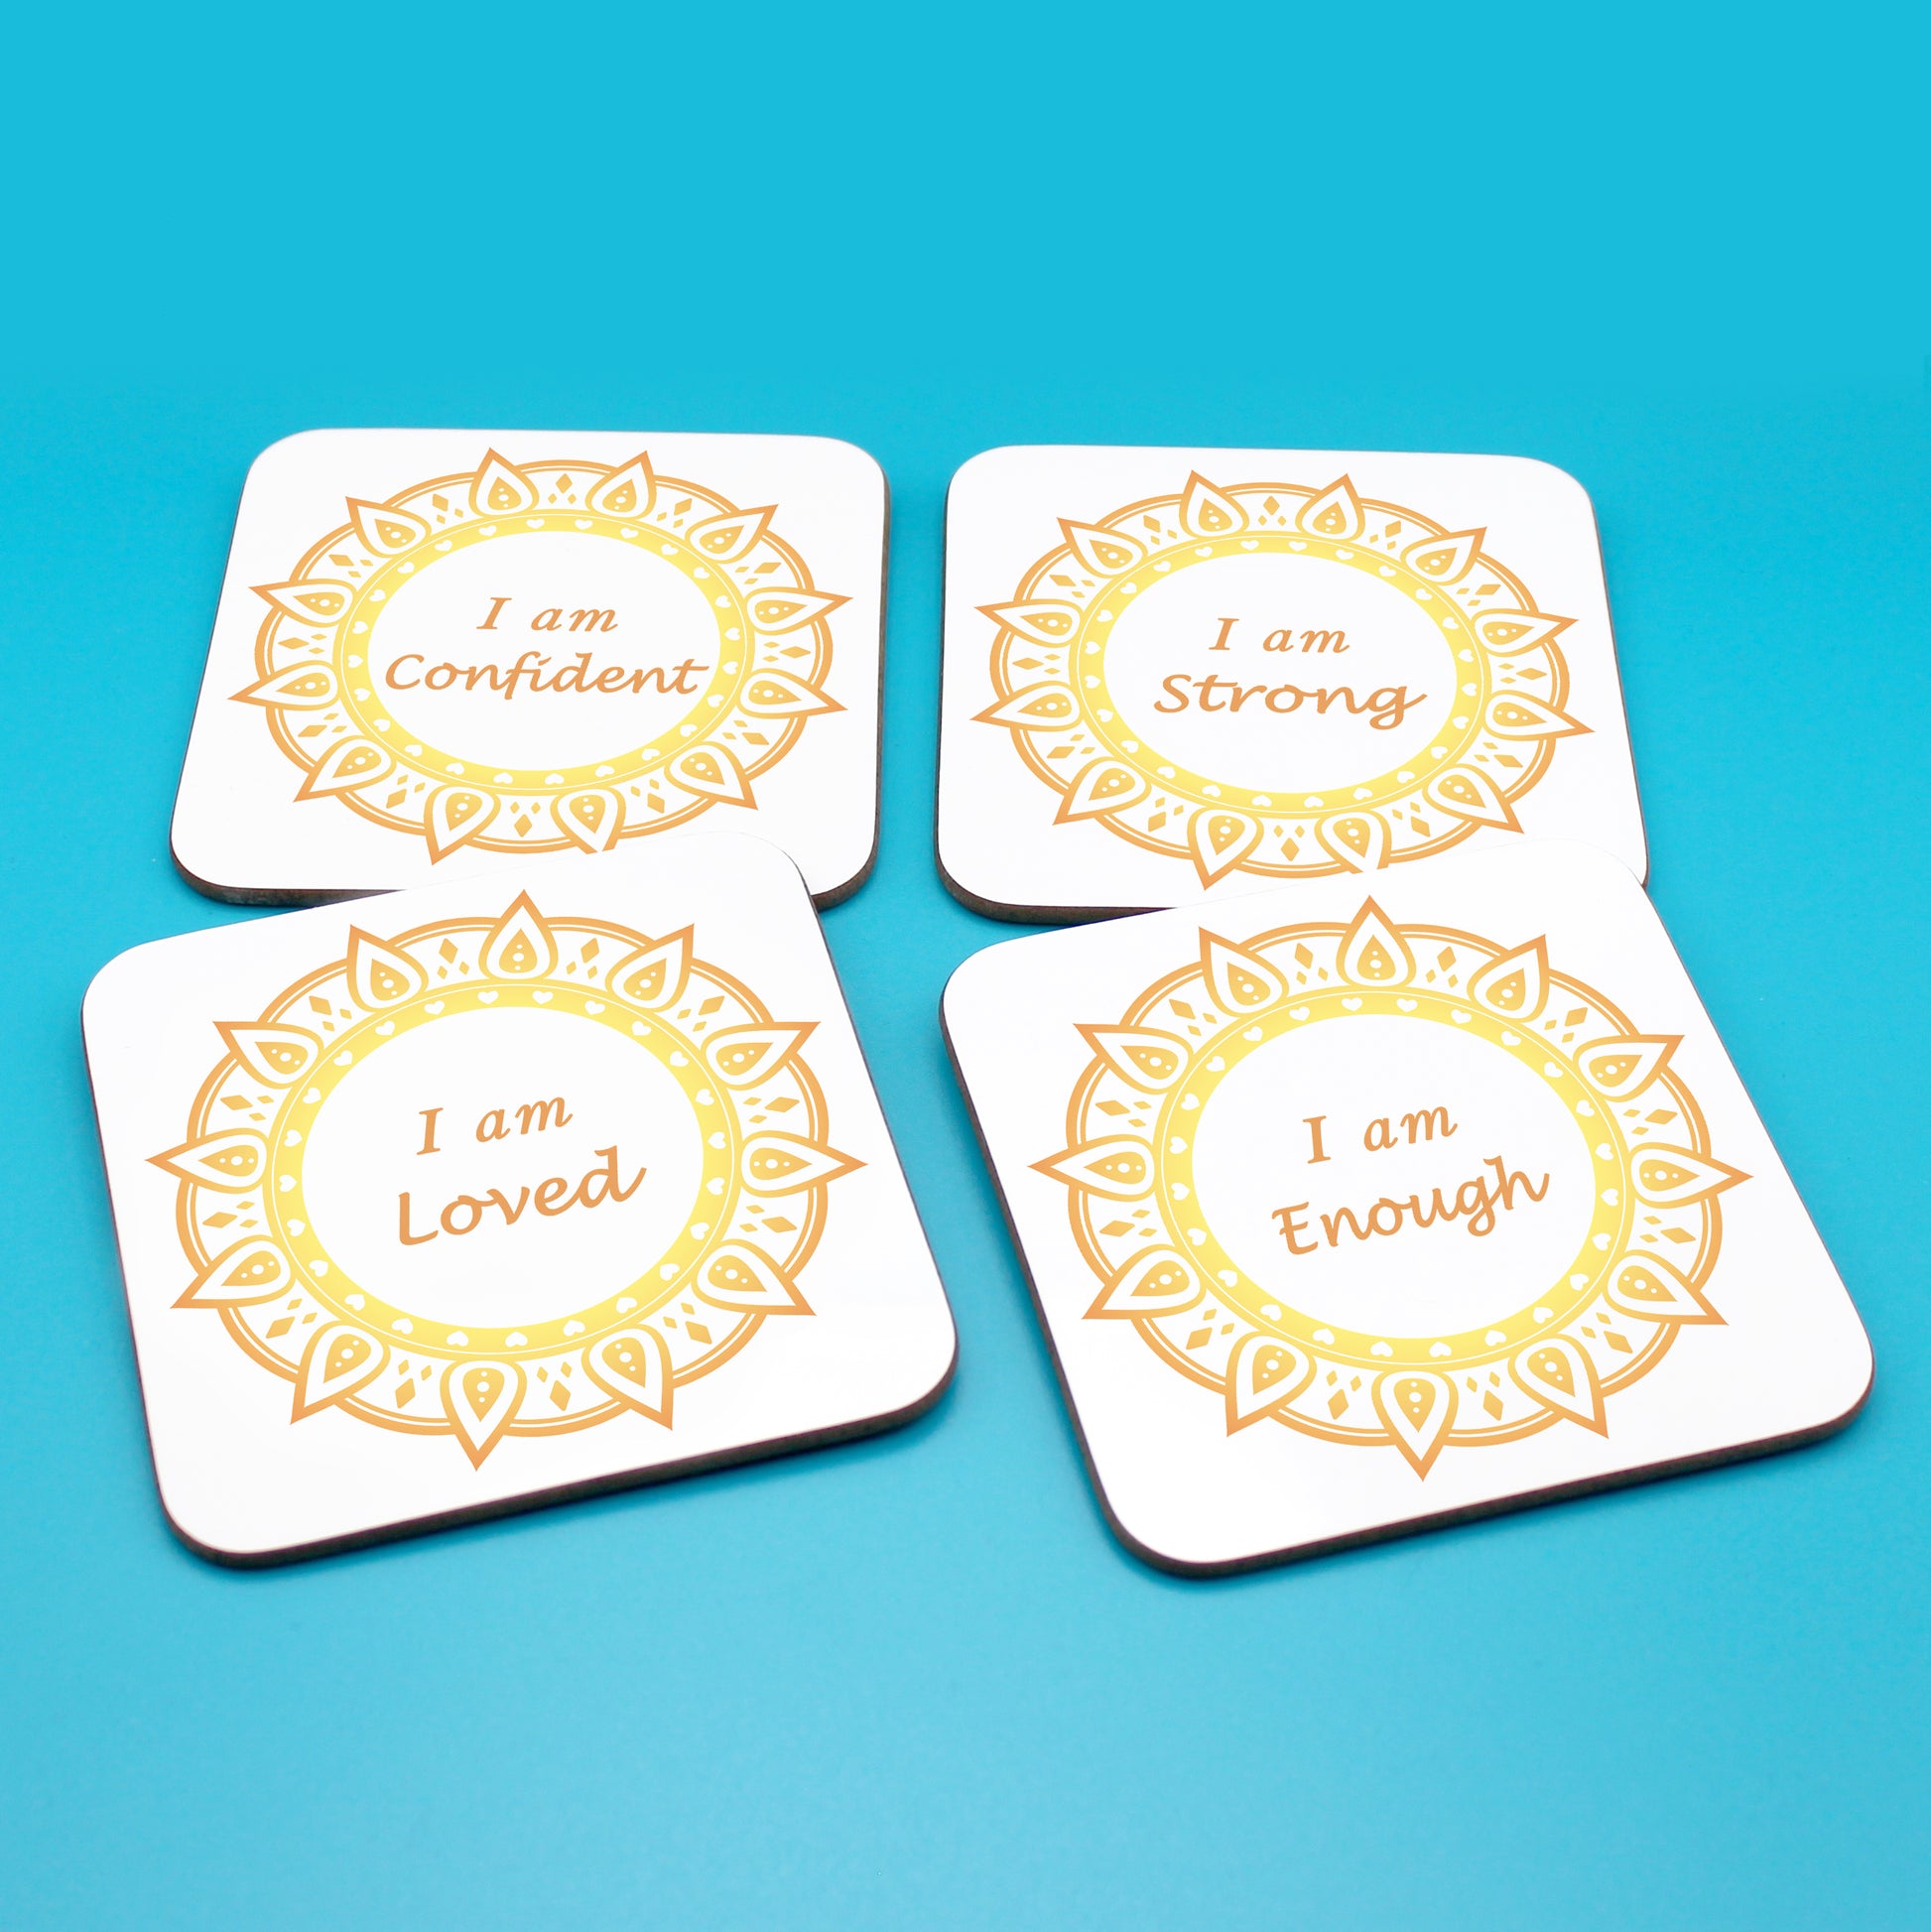 Wellbeing gift. Four square wooden backed personal affirmations coaster set. Mandala design with daily affirmation wording inside the mandala.  Each Affirmations coaster individually reads I am Loved, I am Enough, I am Confident, I am Strong (all mandalas are yellow and orange in this set)